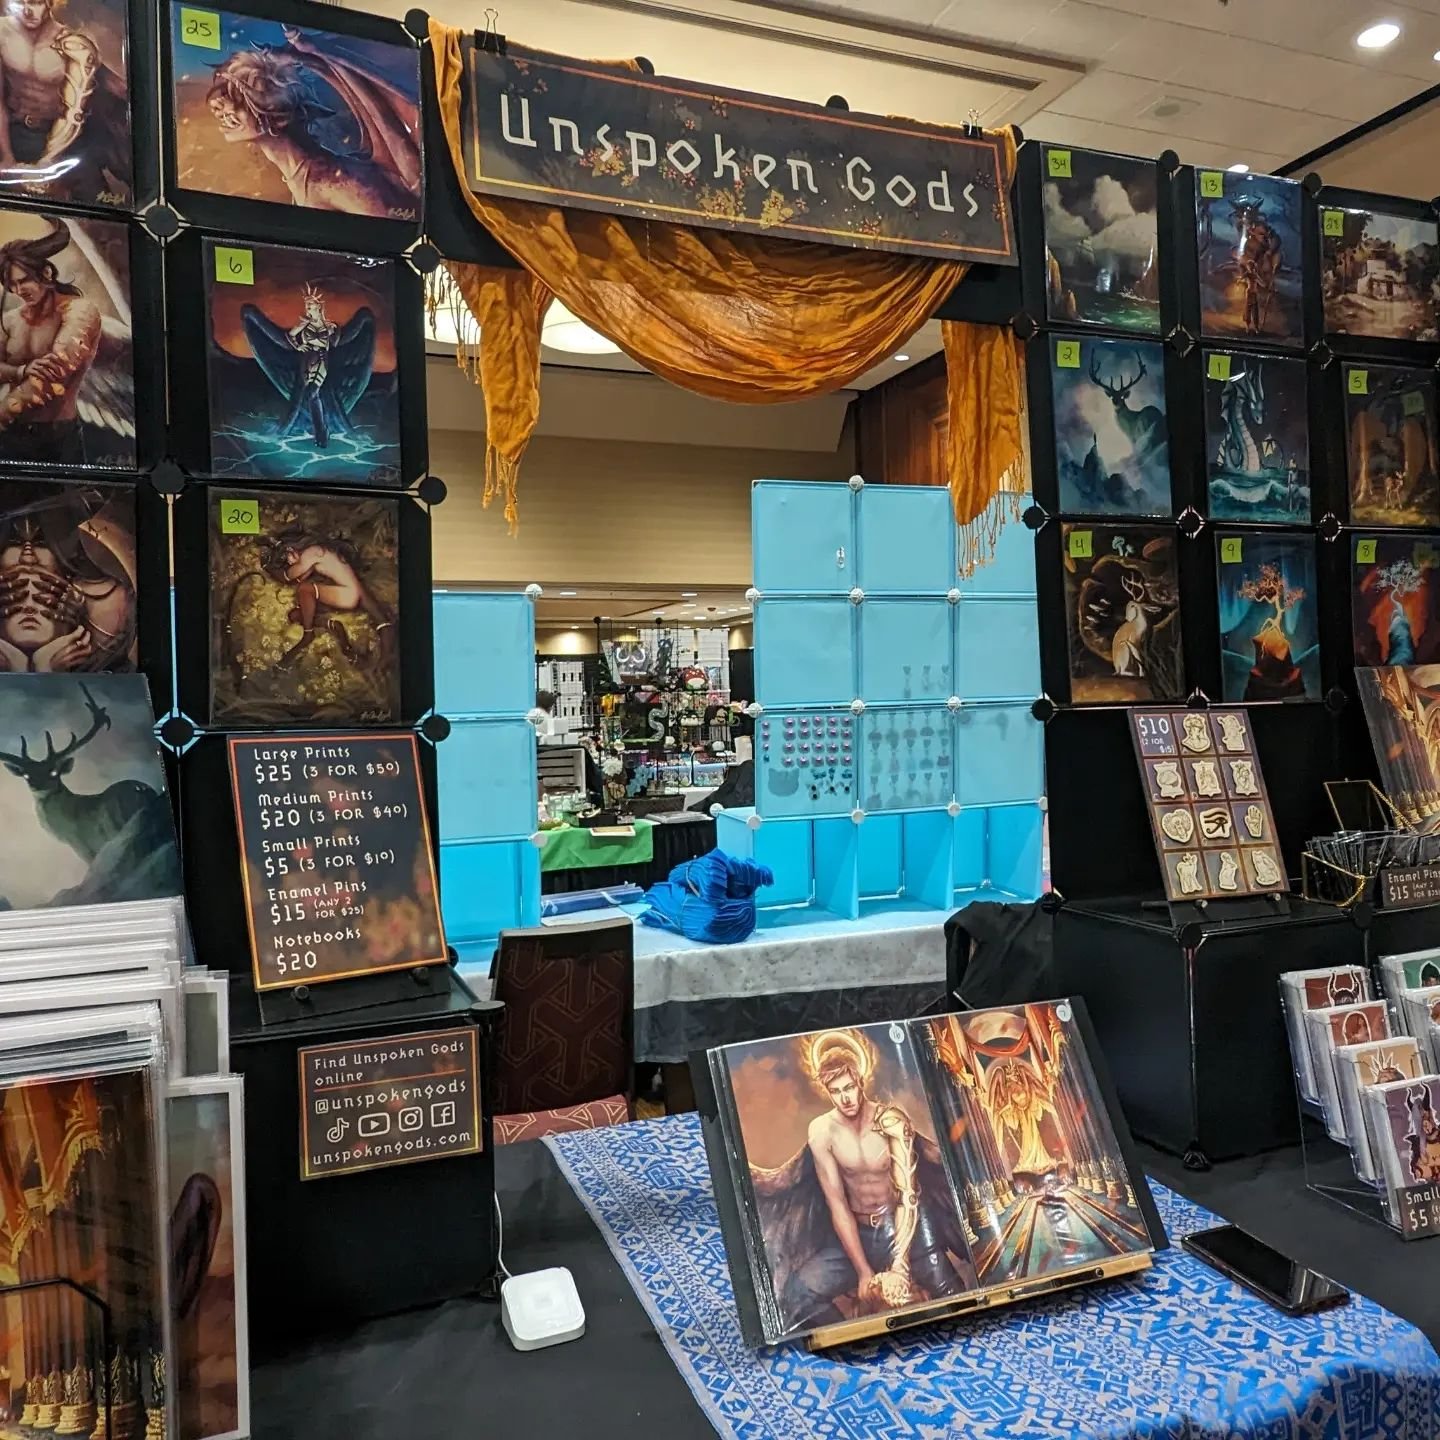 We are set up for day one of @sfotr ! Swipe ➡️ for a map!

Come find us in the vendor hall!

#unspokengods #oc #originalcharacter #kimberleyCrawford #scifiontherock2024 #sfotr2024 #convention #originalart #fantasyart